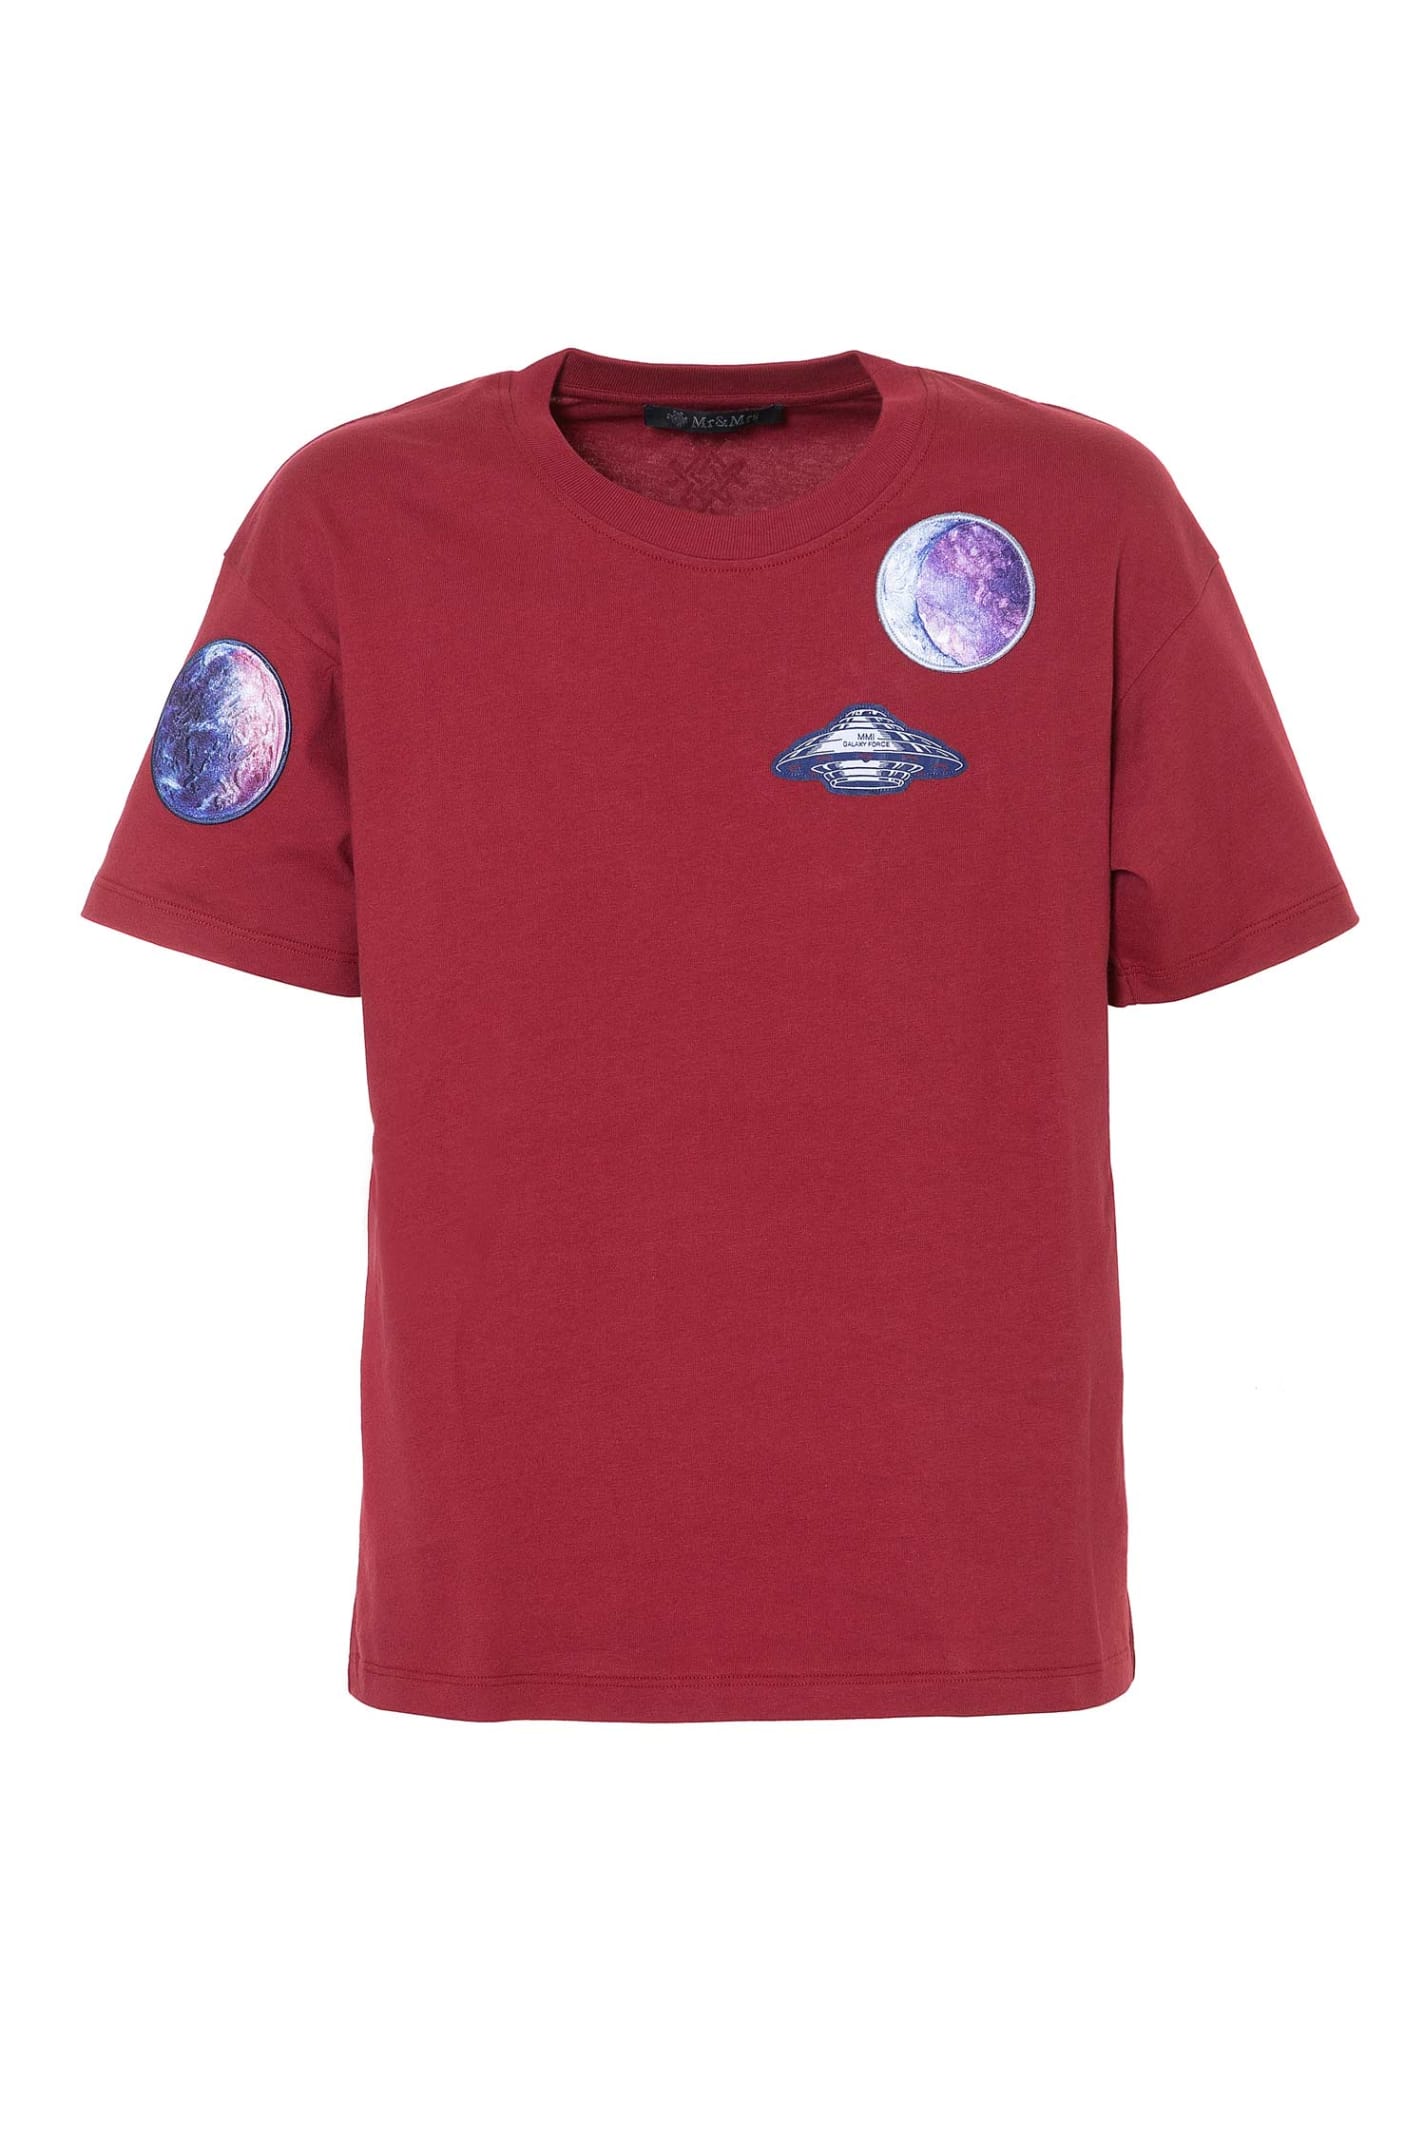 Mr & Mrs Italy Space-inspired Regular T-shirt For Woman